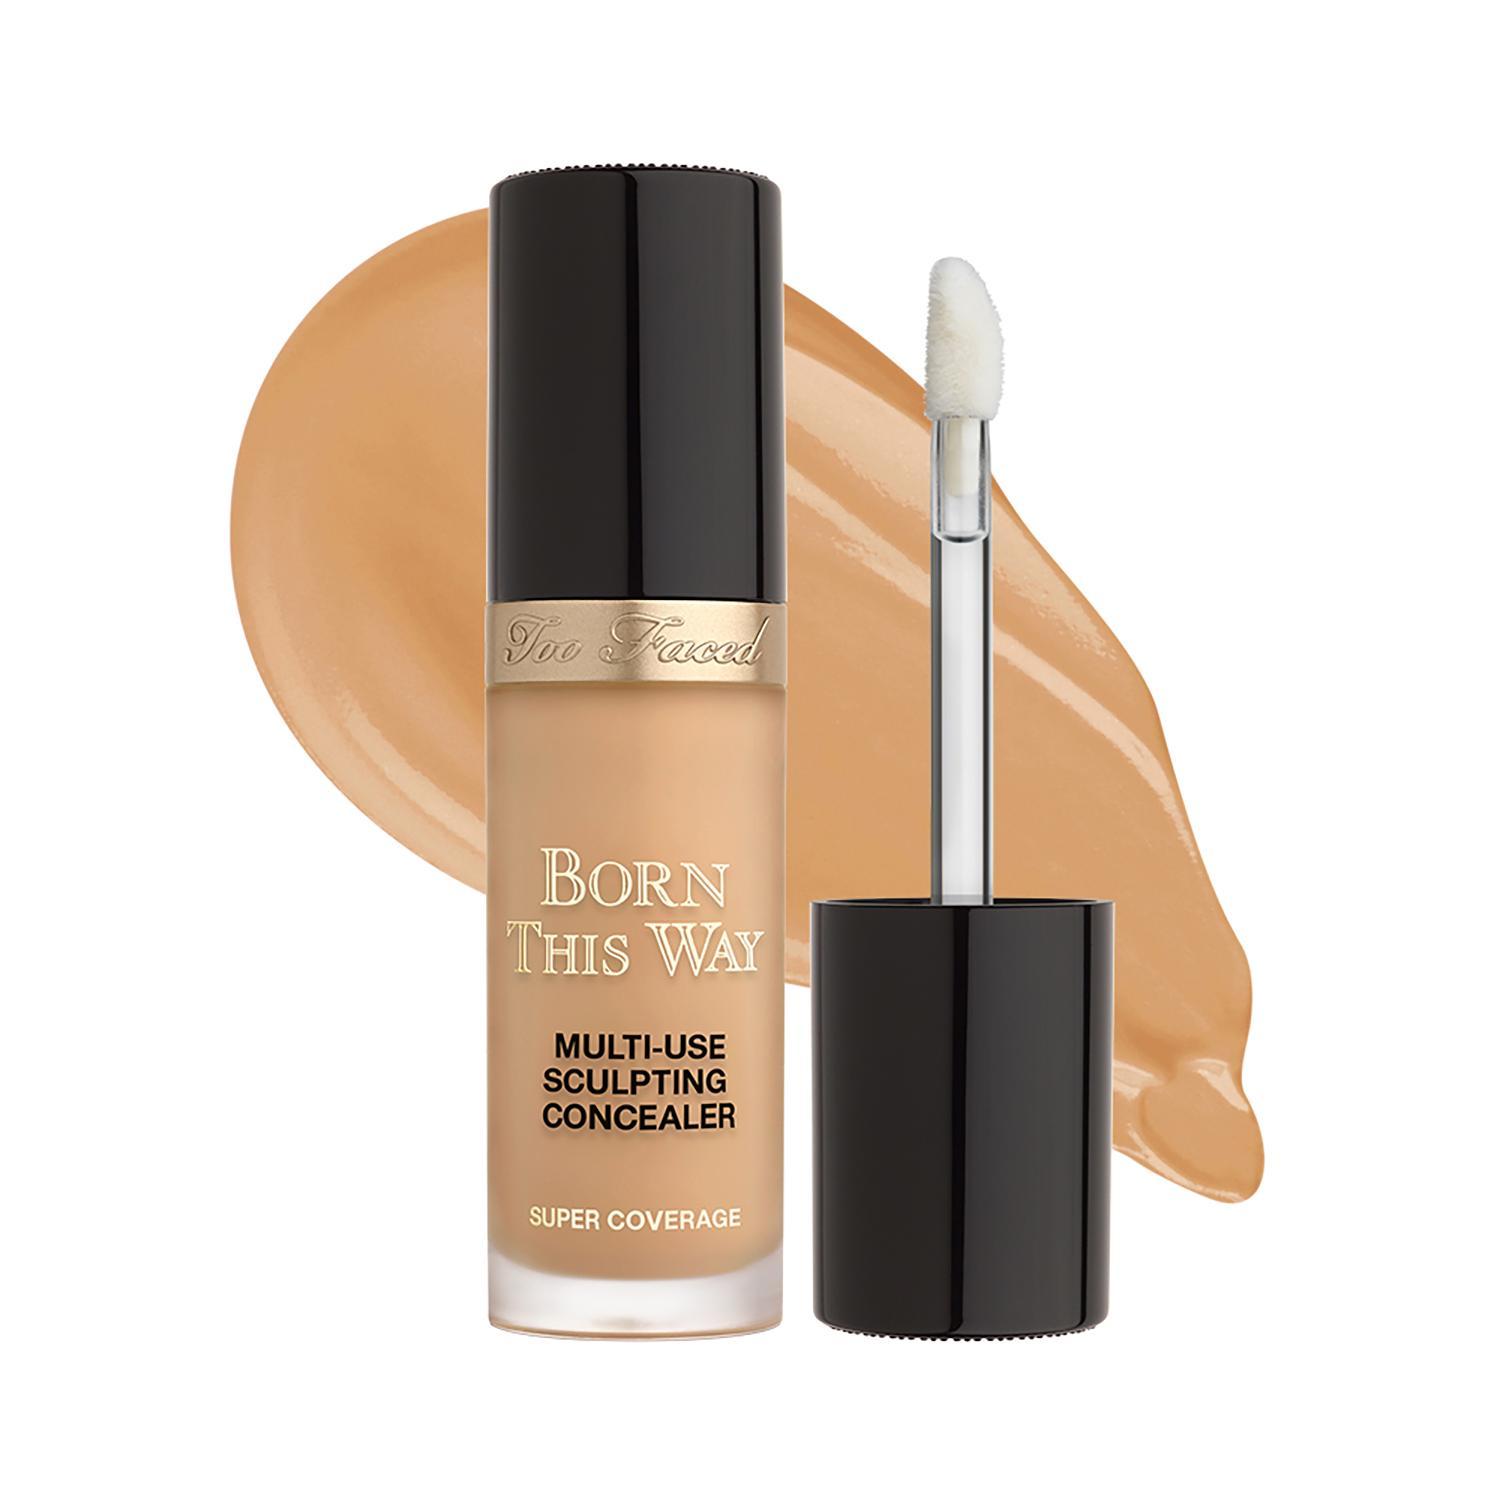 too faced born this way super coverage multi use sculpting concealer- sand (13.5ml)